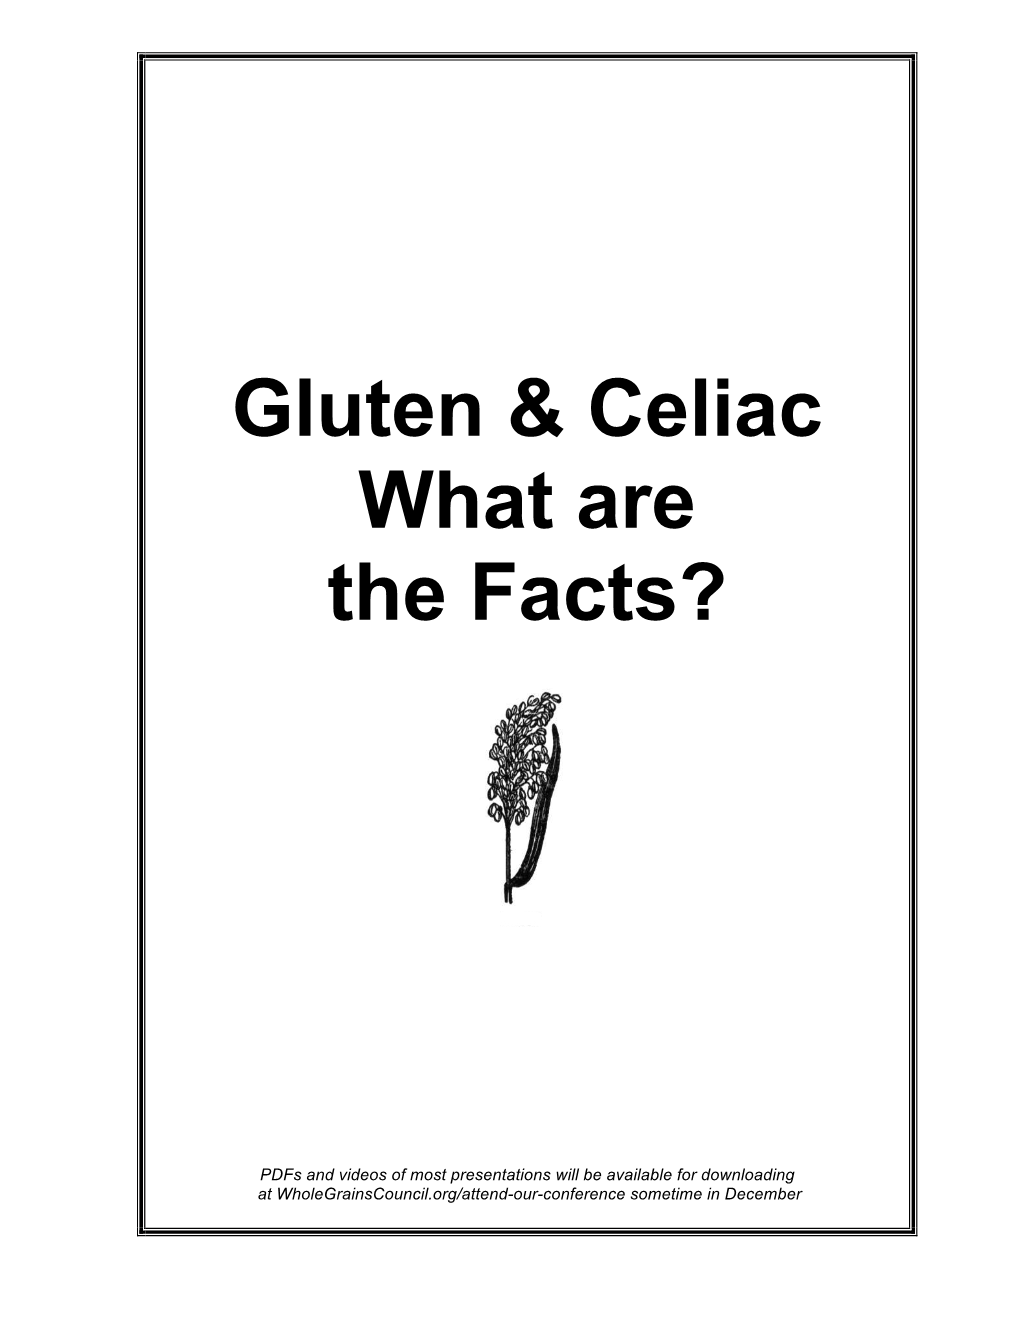 Gluten & Celiac What Are the Facts?